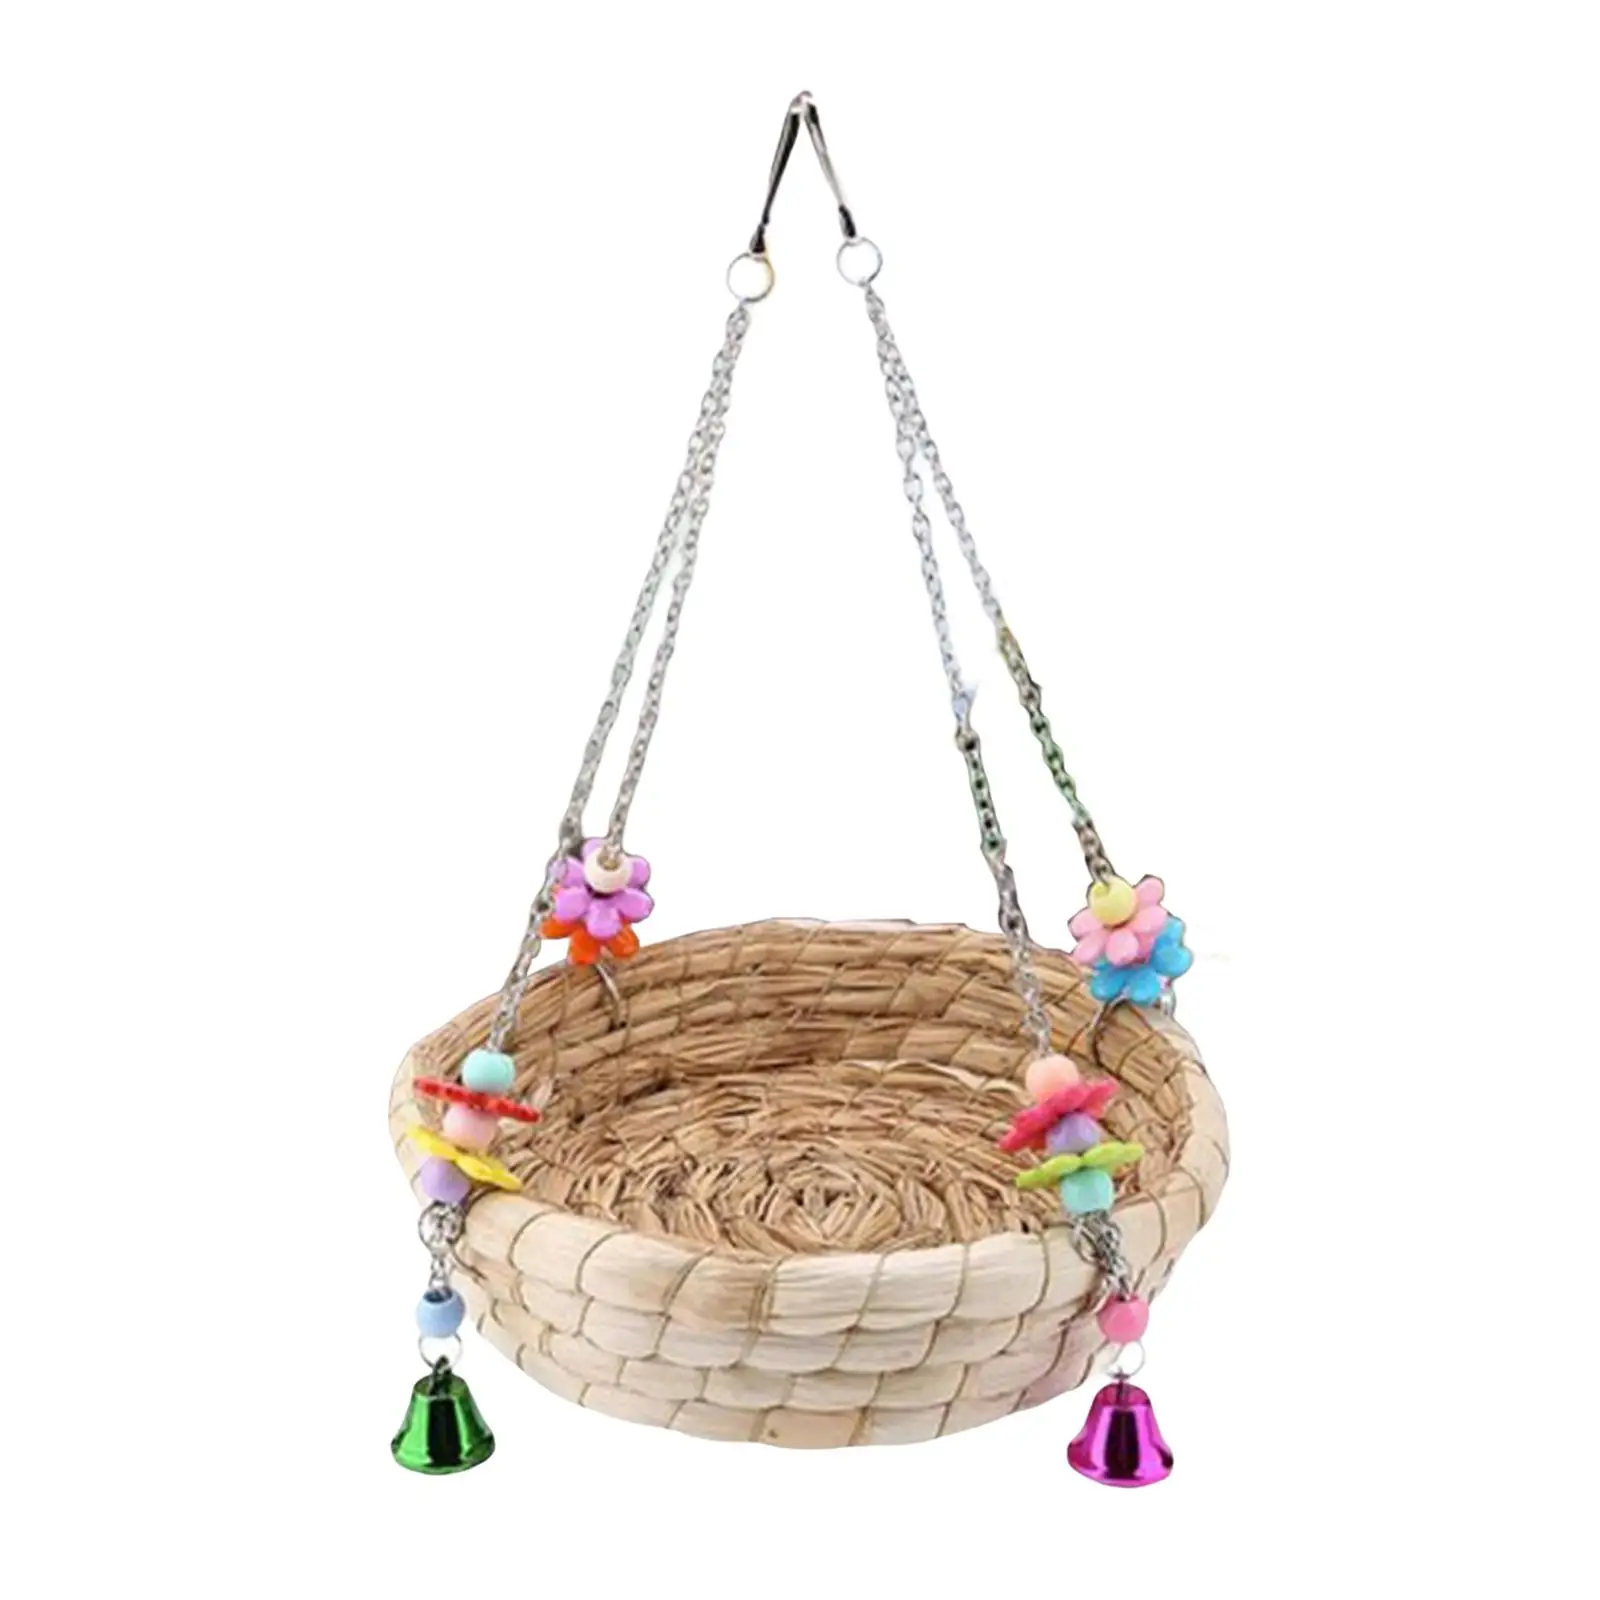 Bird Straws Swing Toy Woven Straw Lightweight for Cockatoo Budgie Gnawing